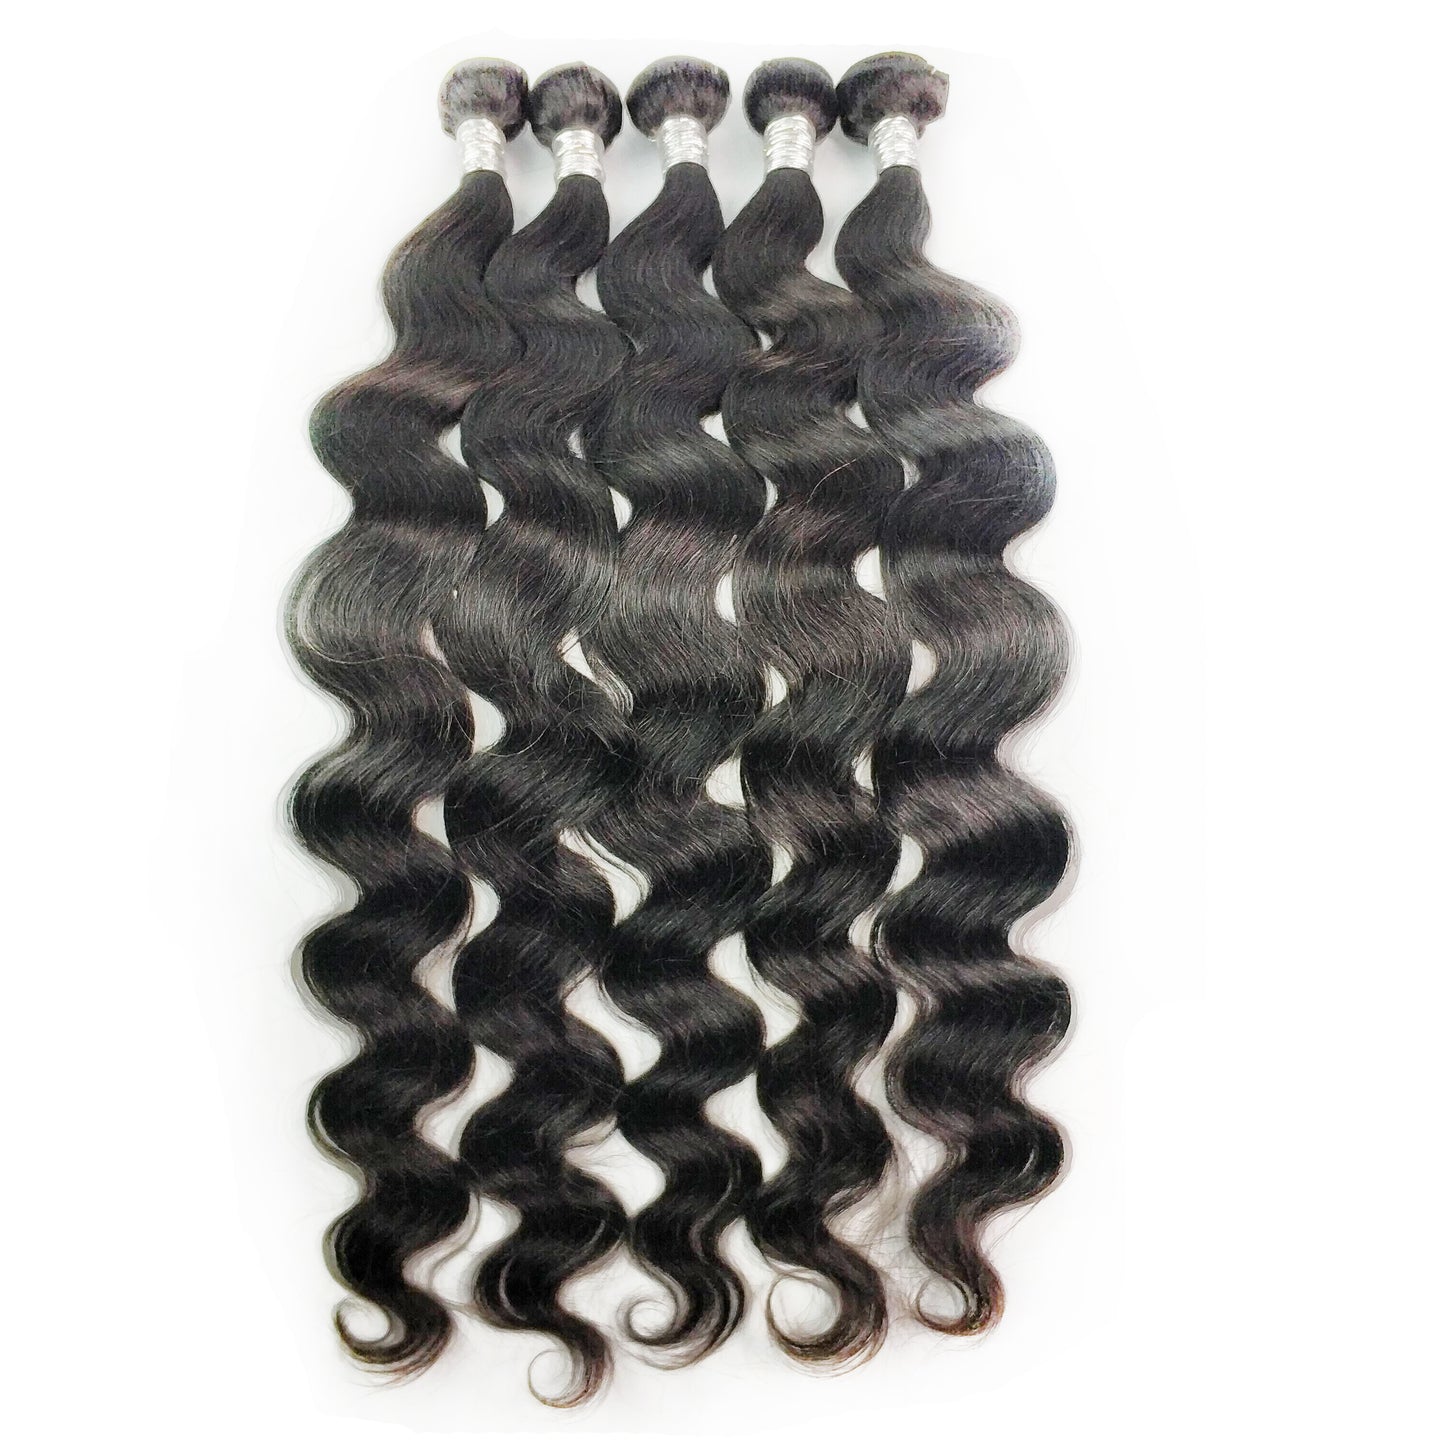 Fashow 28 30 32 34 36 40 Inch Indian Hair